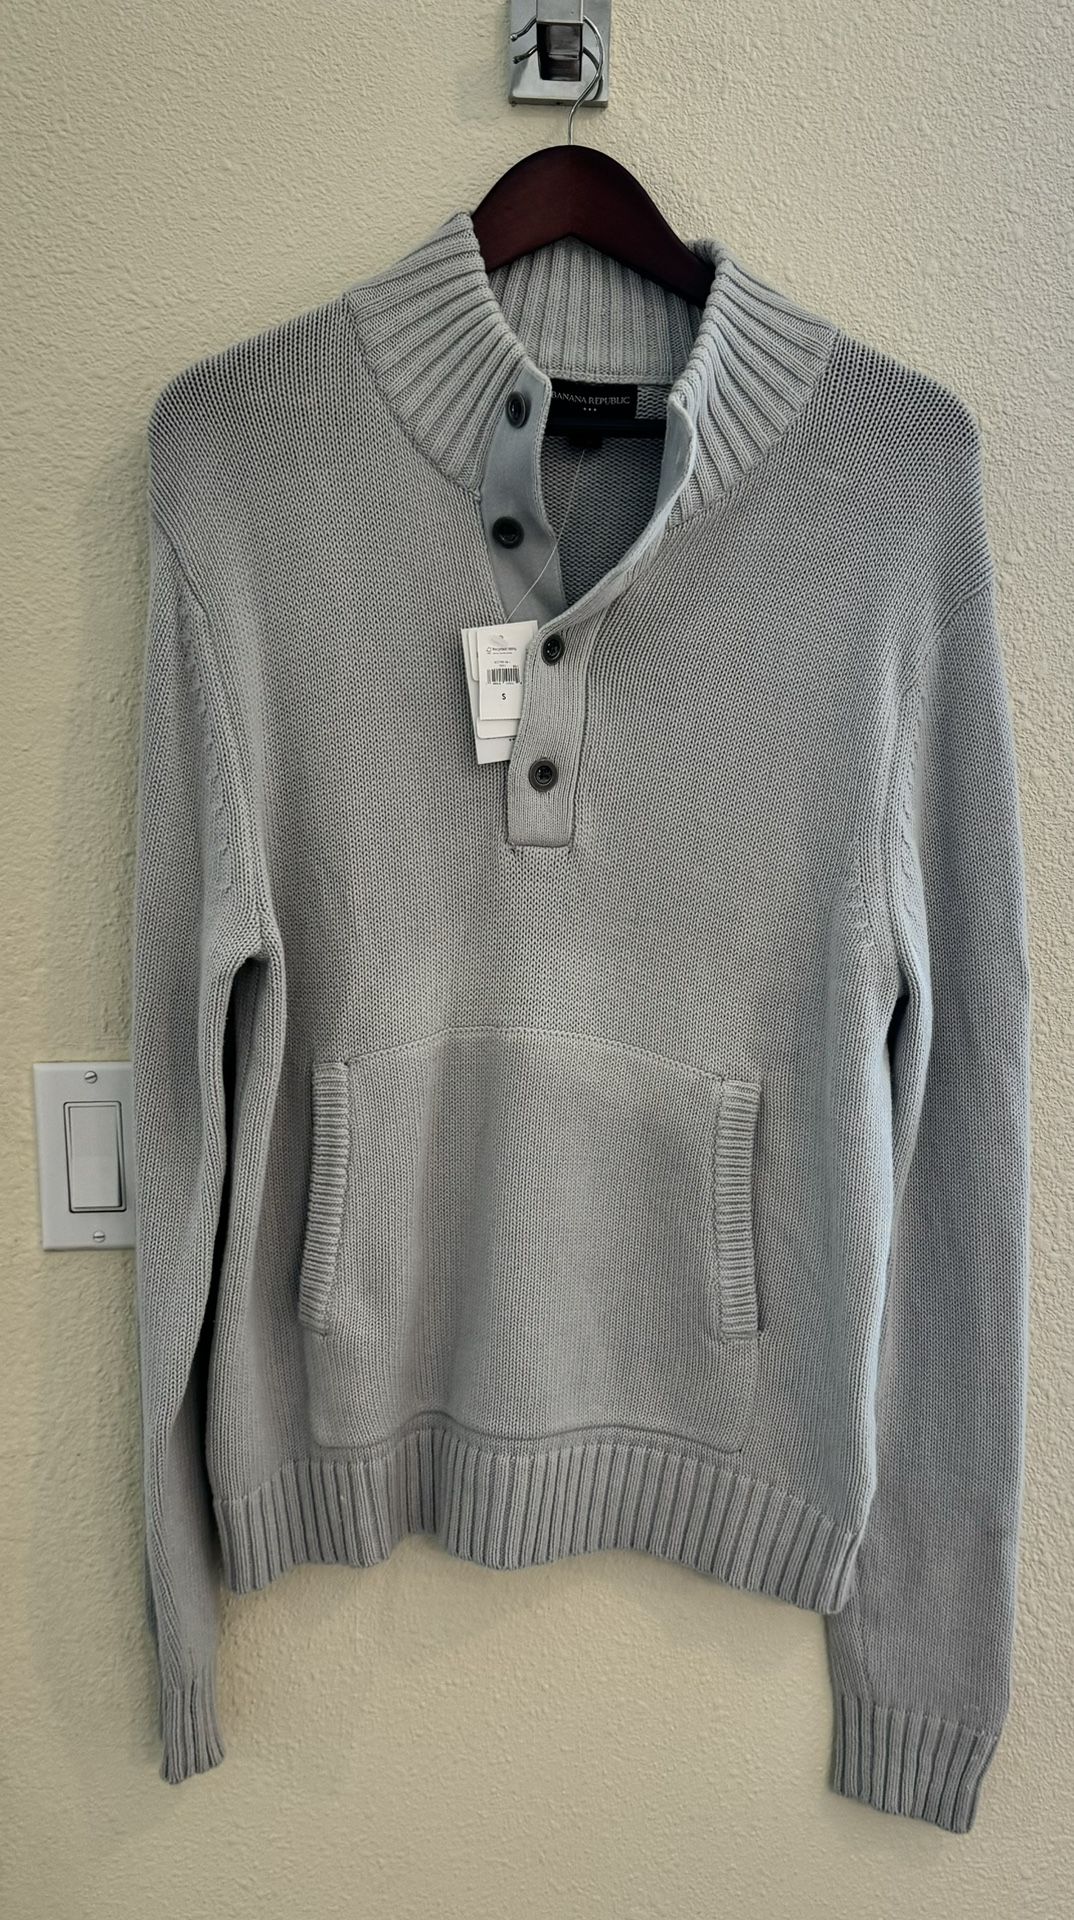 New With Tag Banana Republic Men’s Sweater 